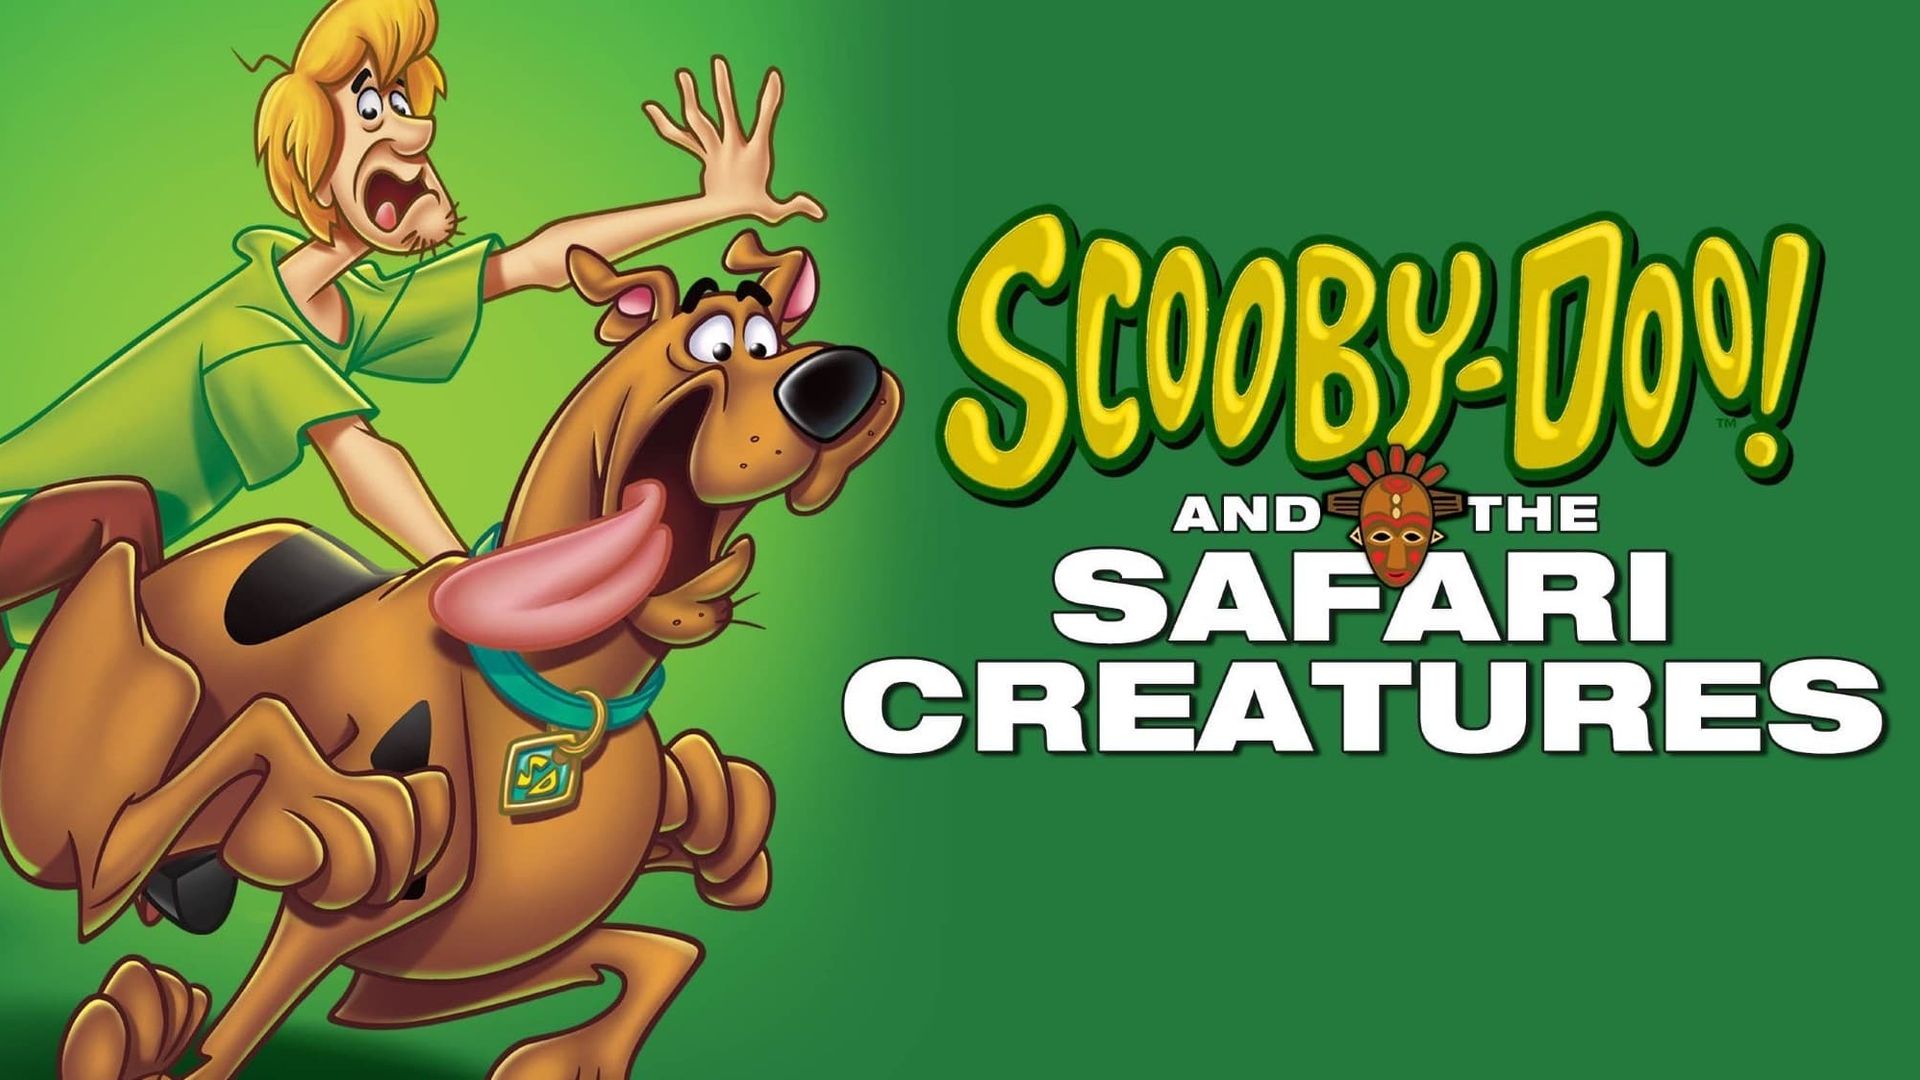 Scooby-Doo! and the Safari Creatures background